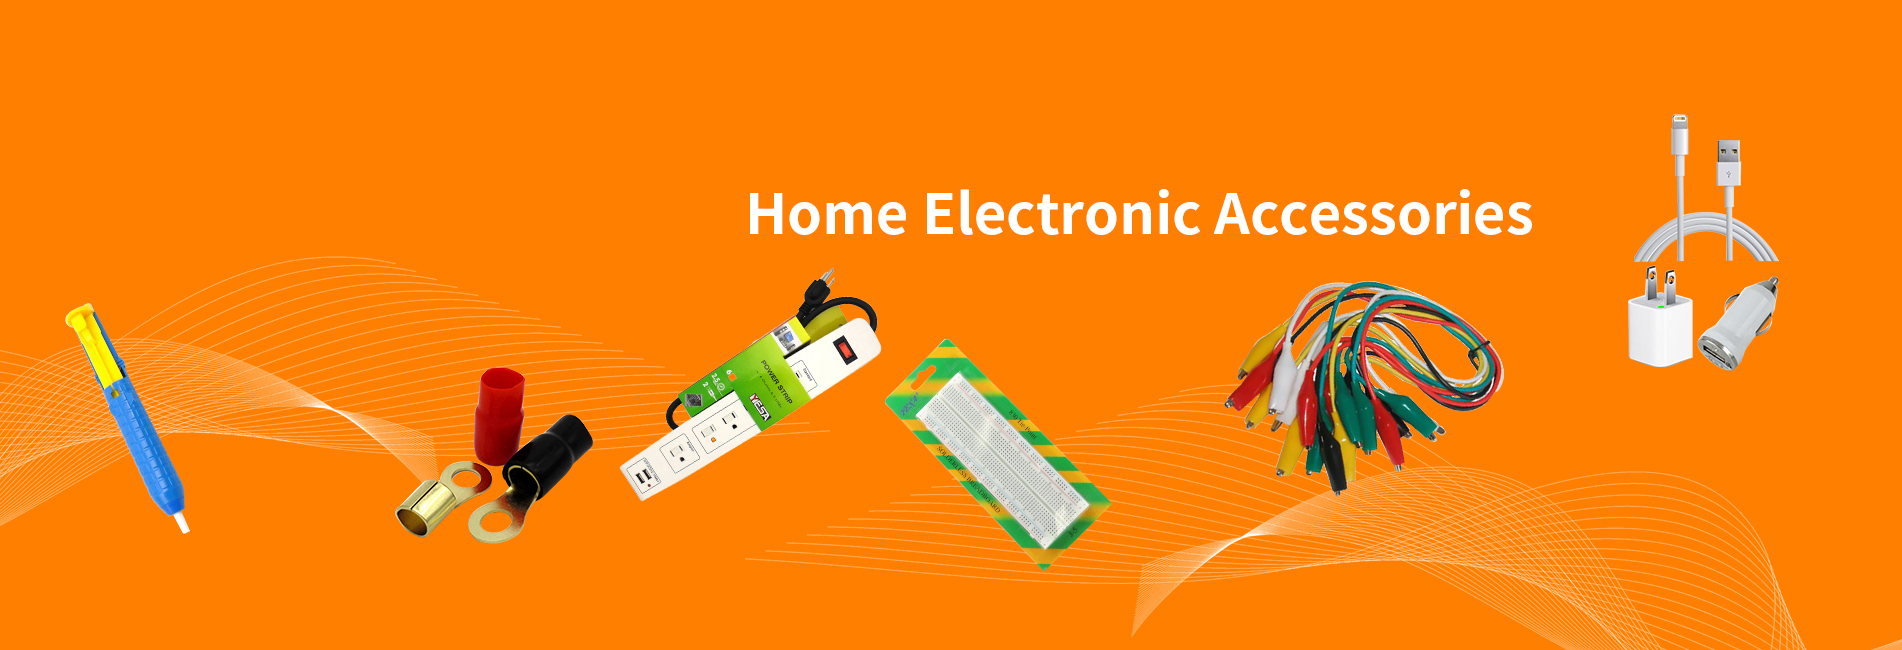 Home Electronic Accessories